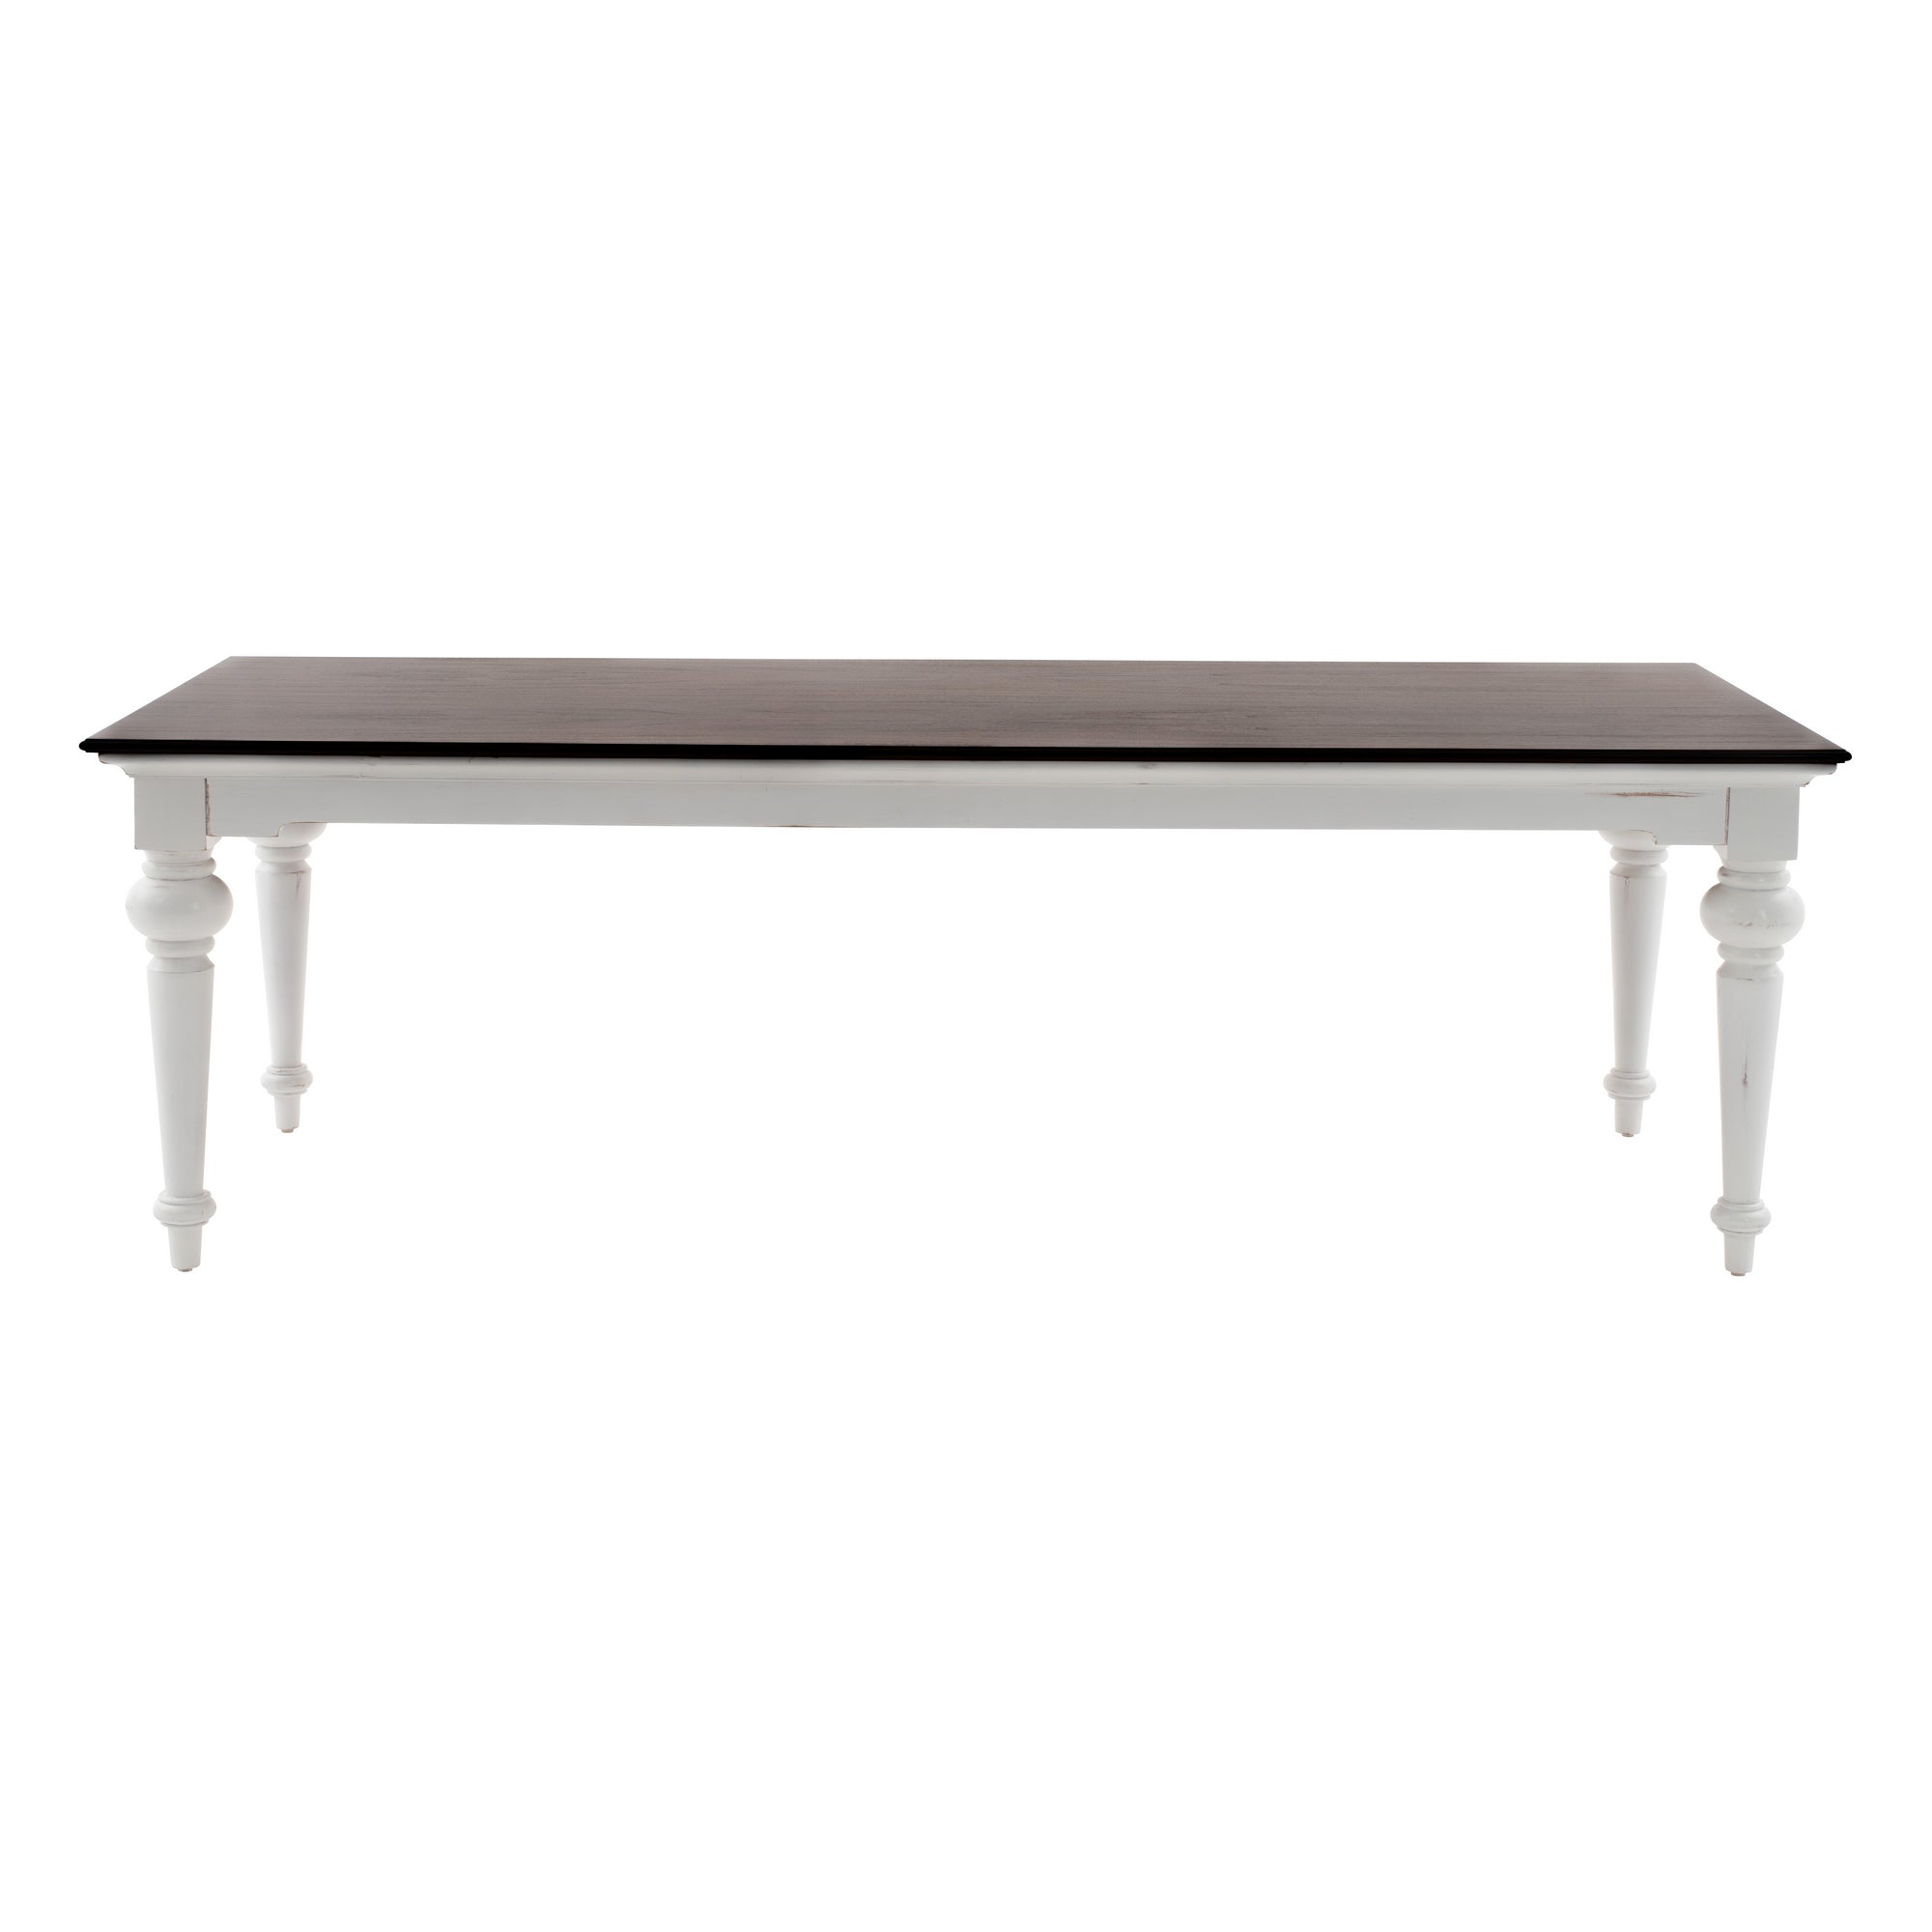 NovaSolo Provence Accent Dining Table 240